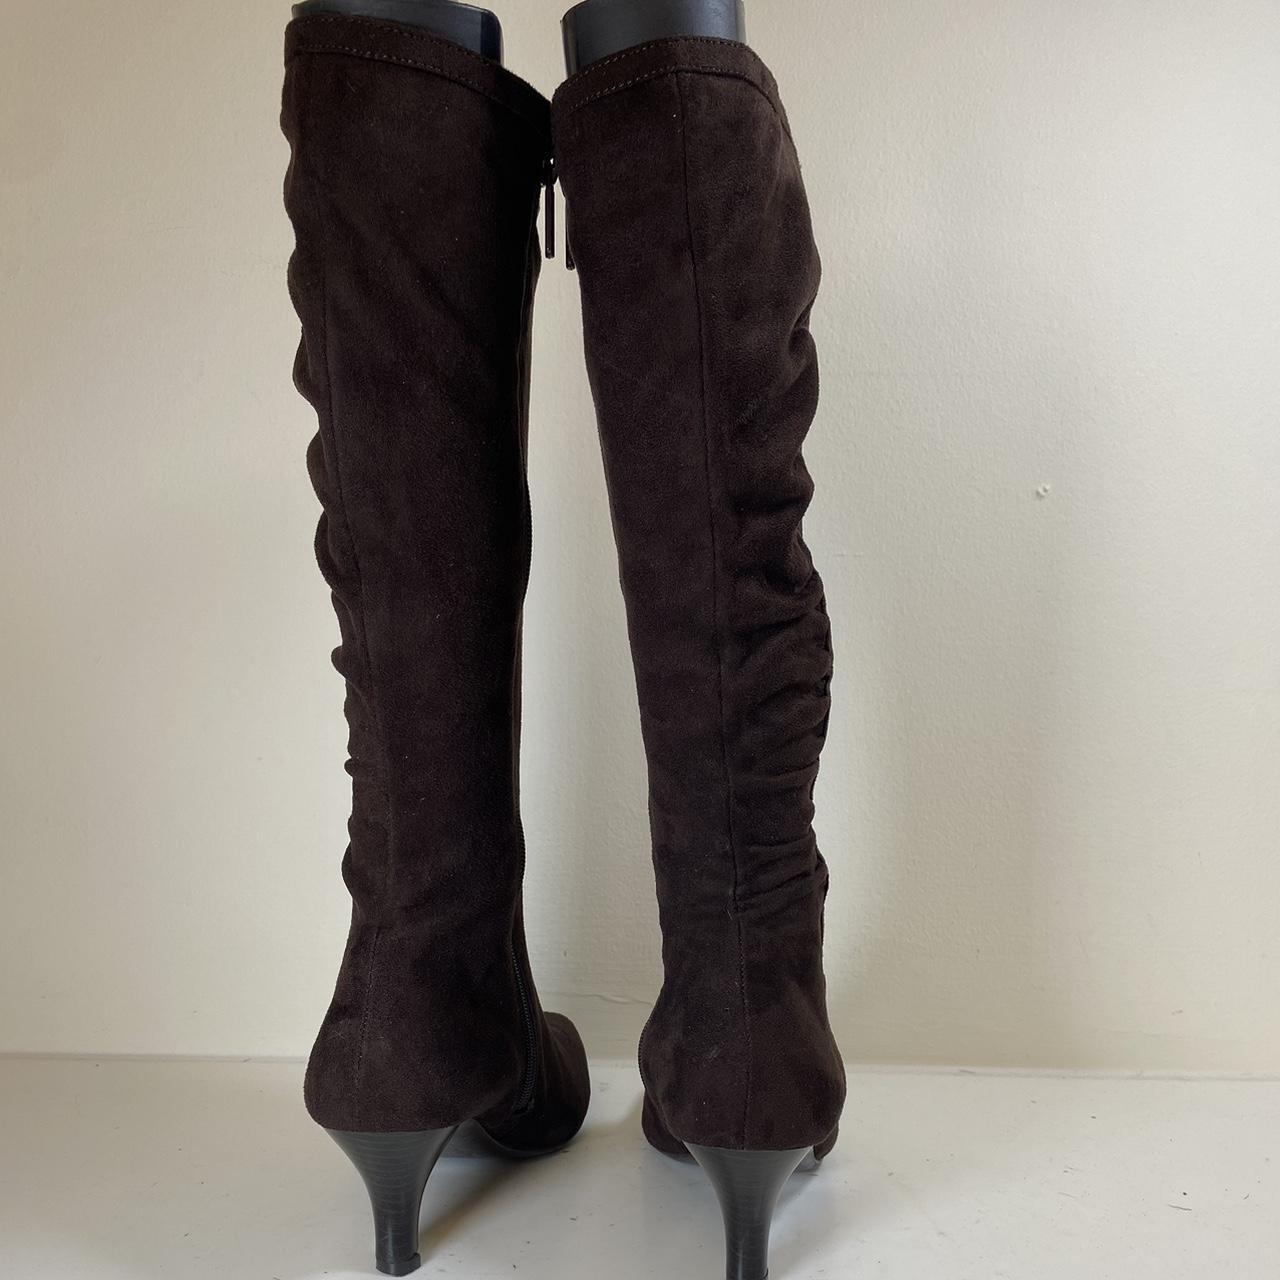 Impo Women's Brown and Black Boots (5)